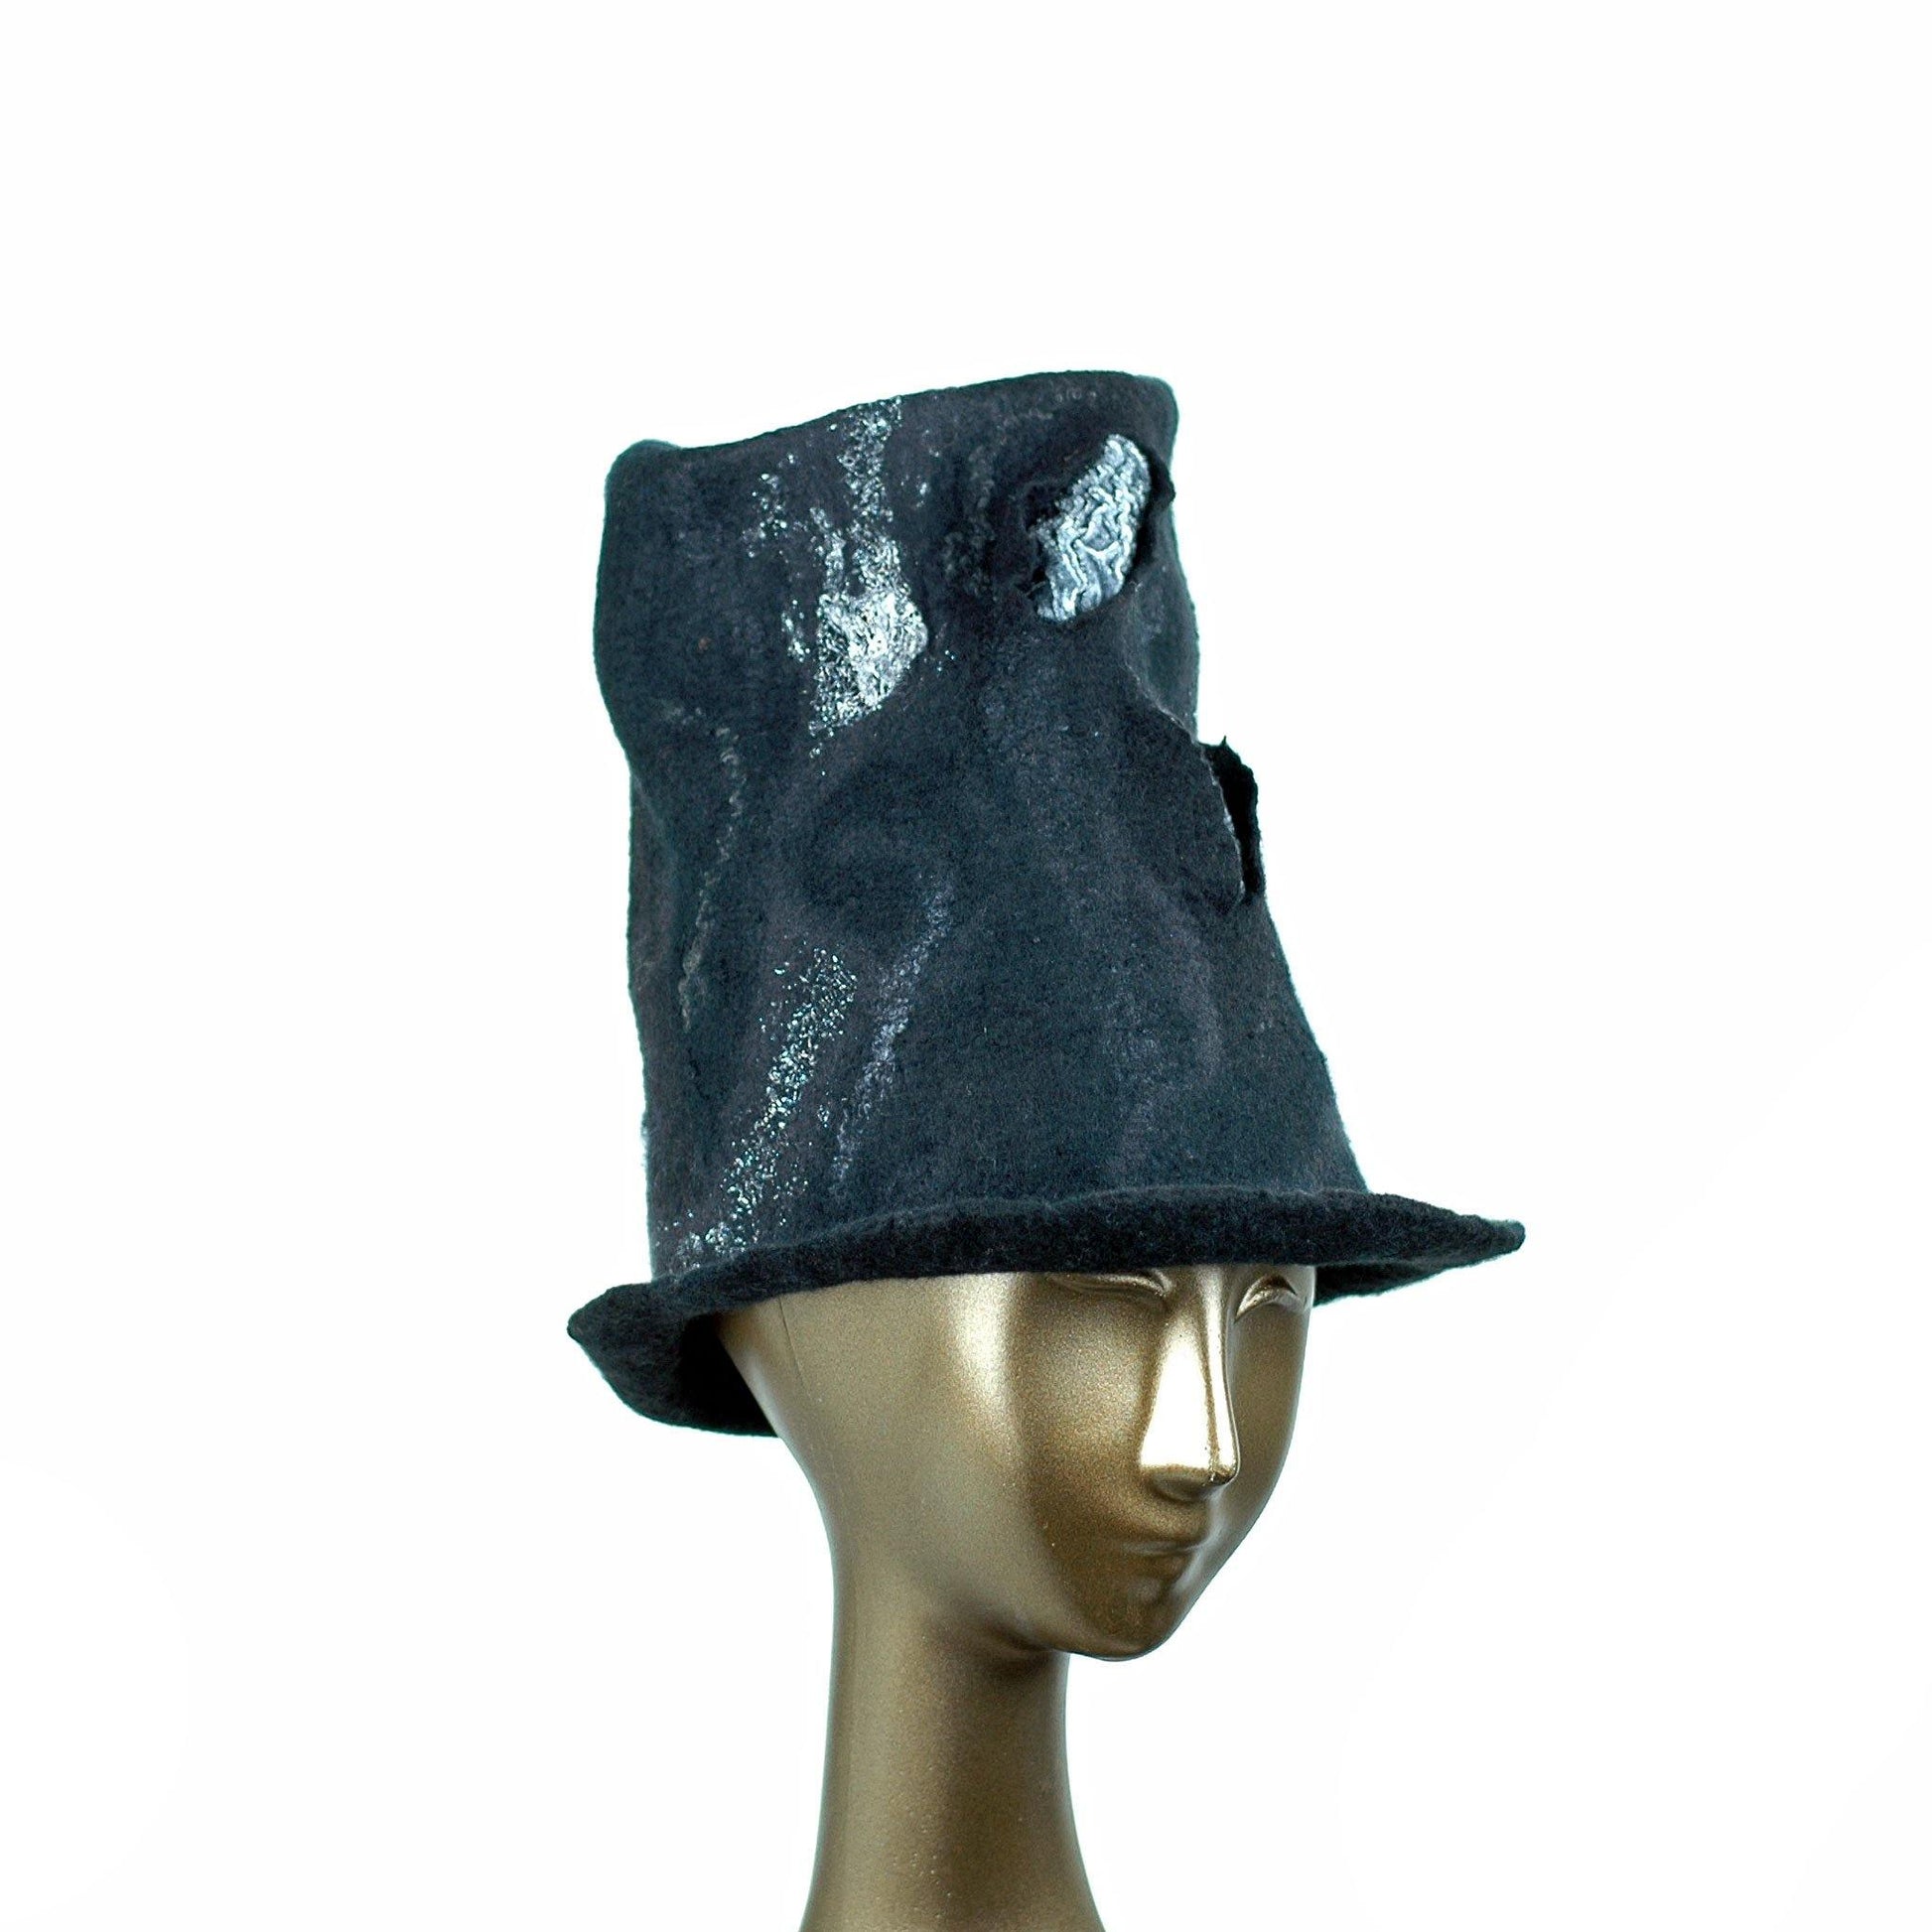 Tall Black Felted Top Hat with Velvet Decorations - three quarters view